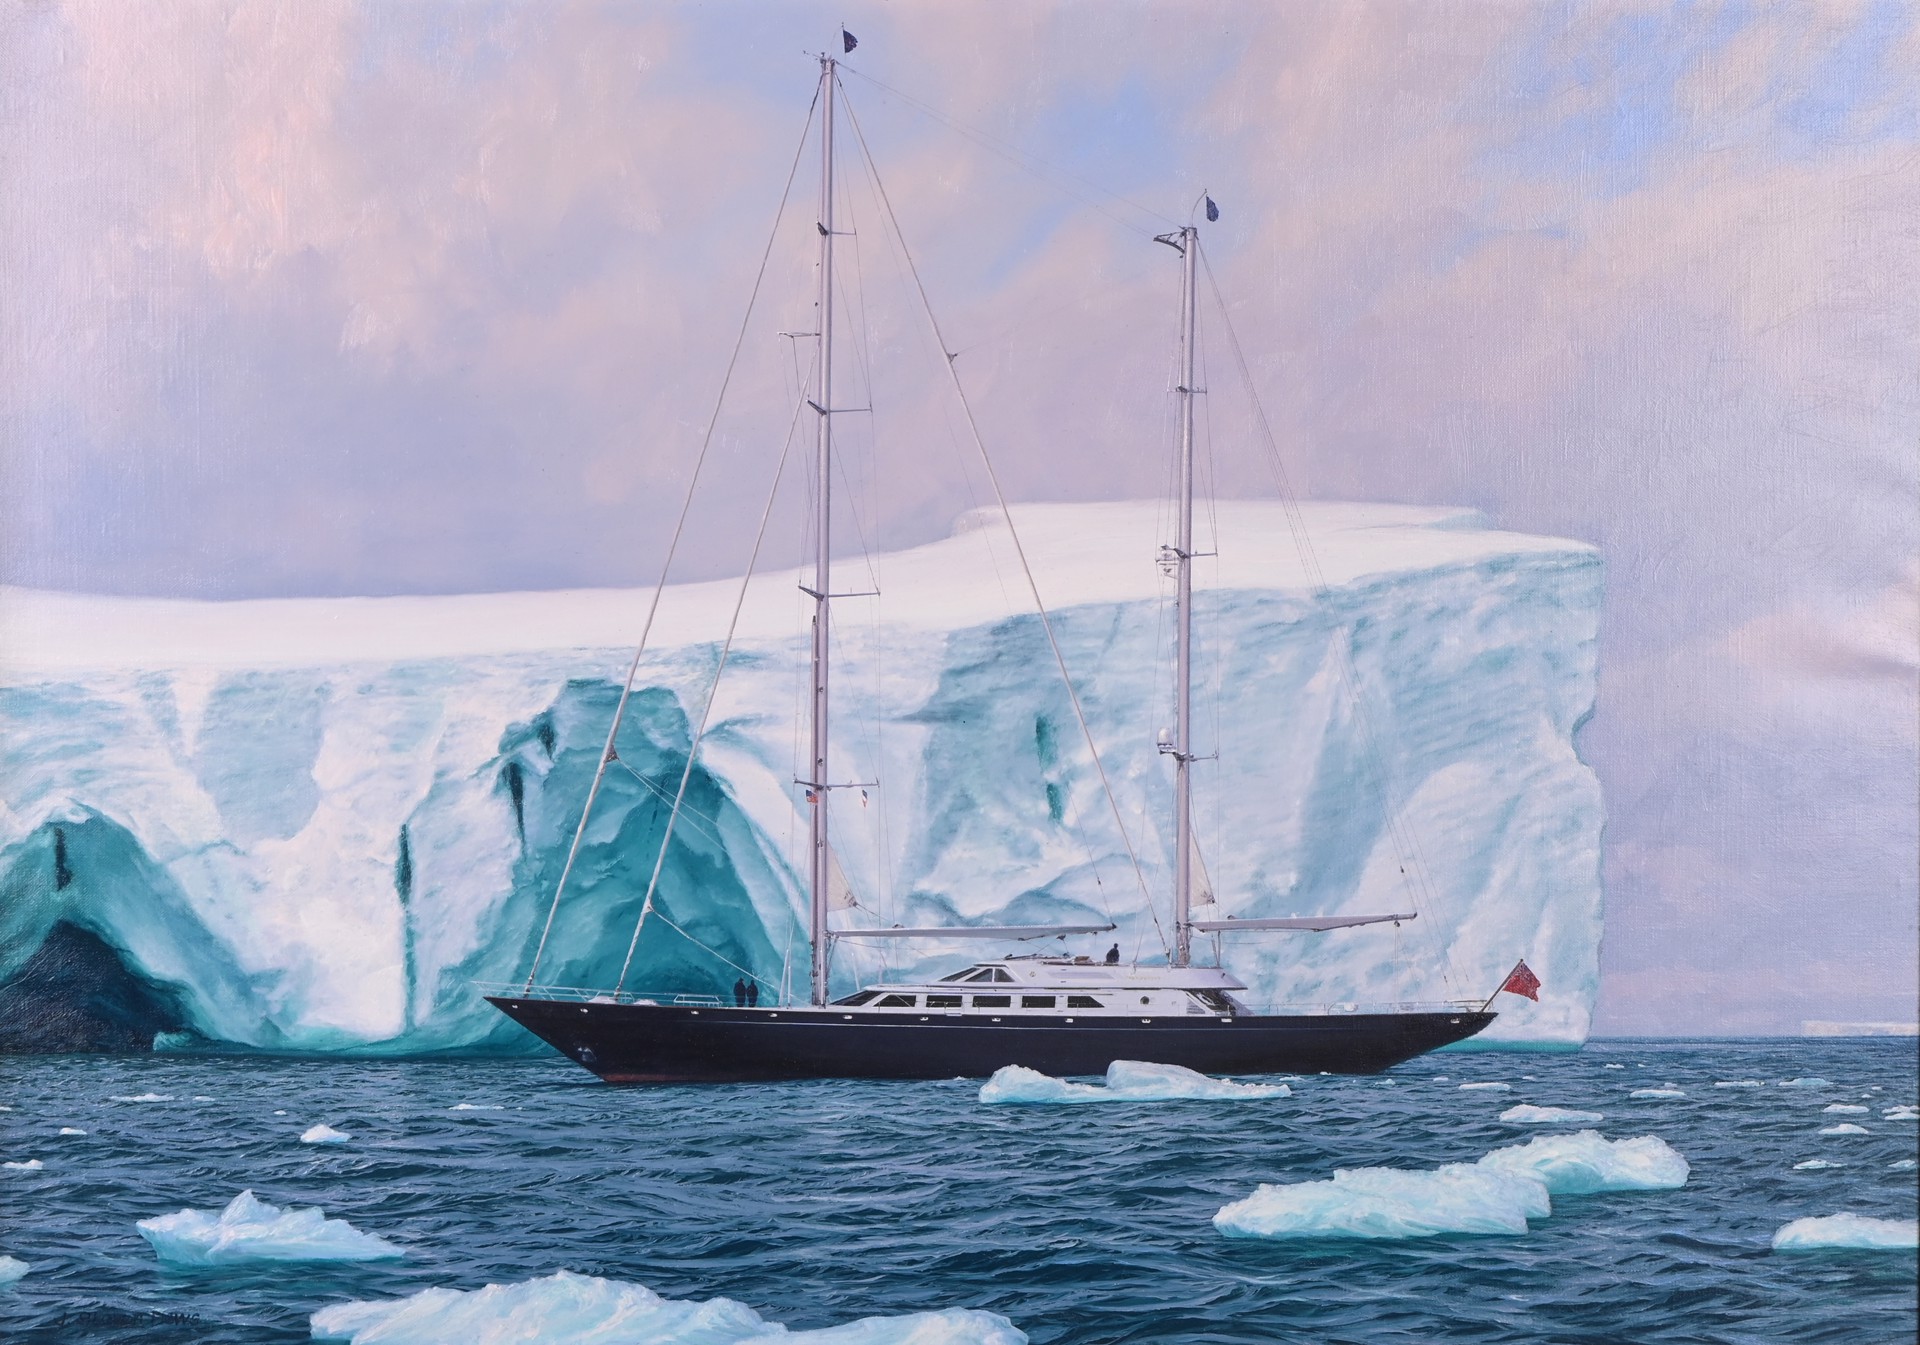 A Sailboat in the Artic by John Steven Dews